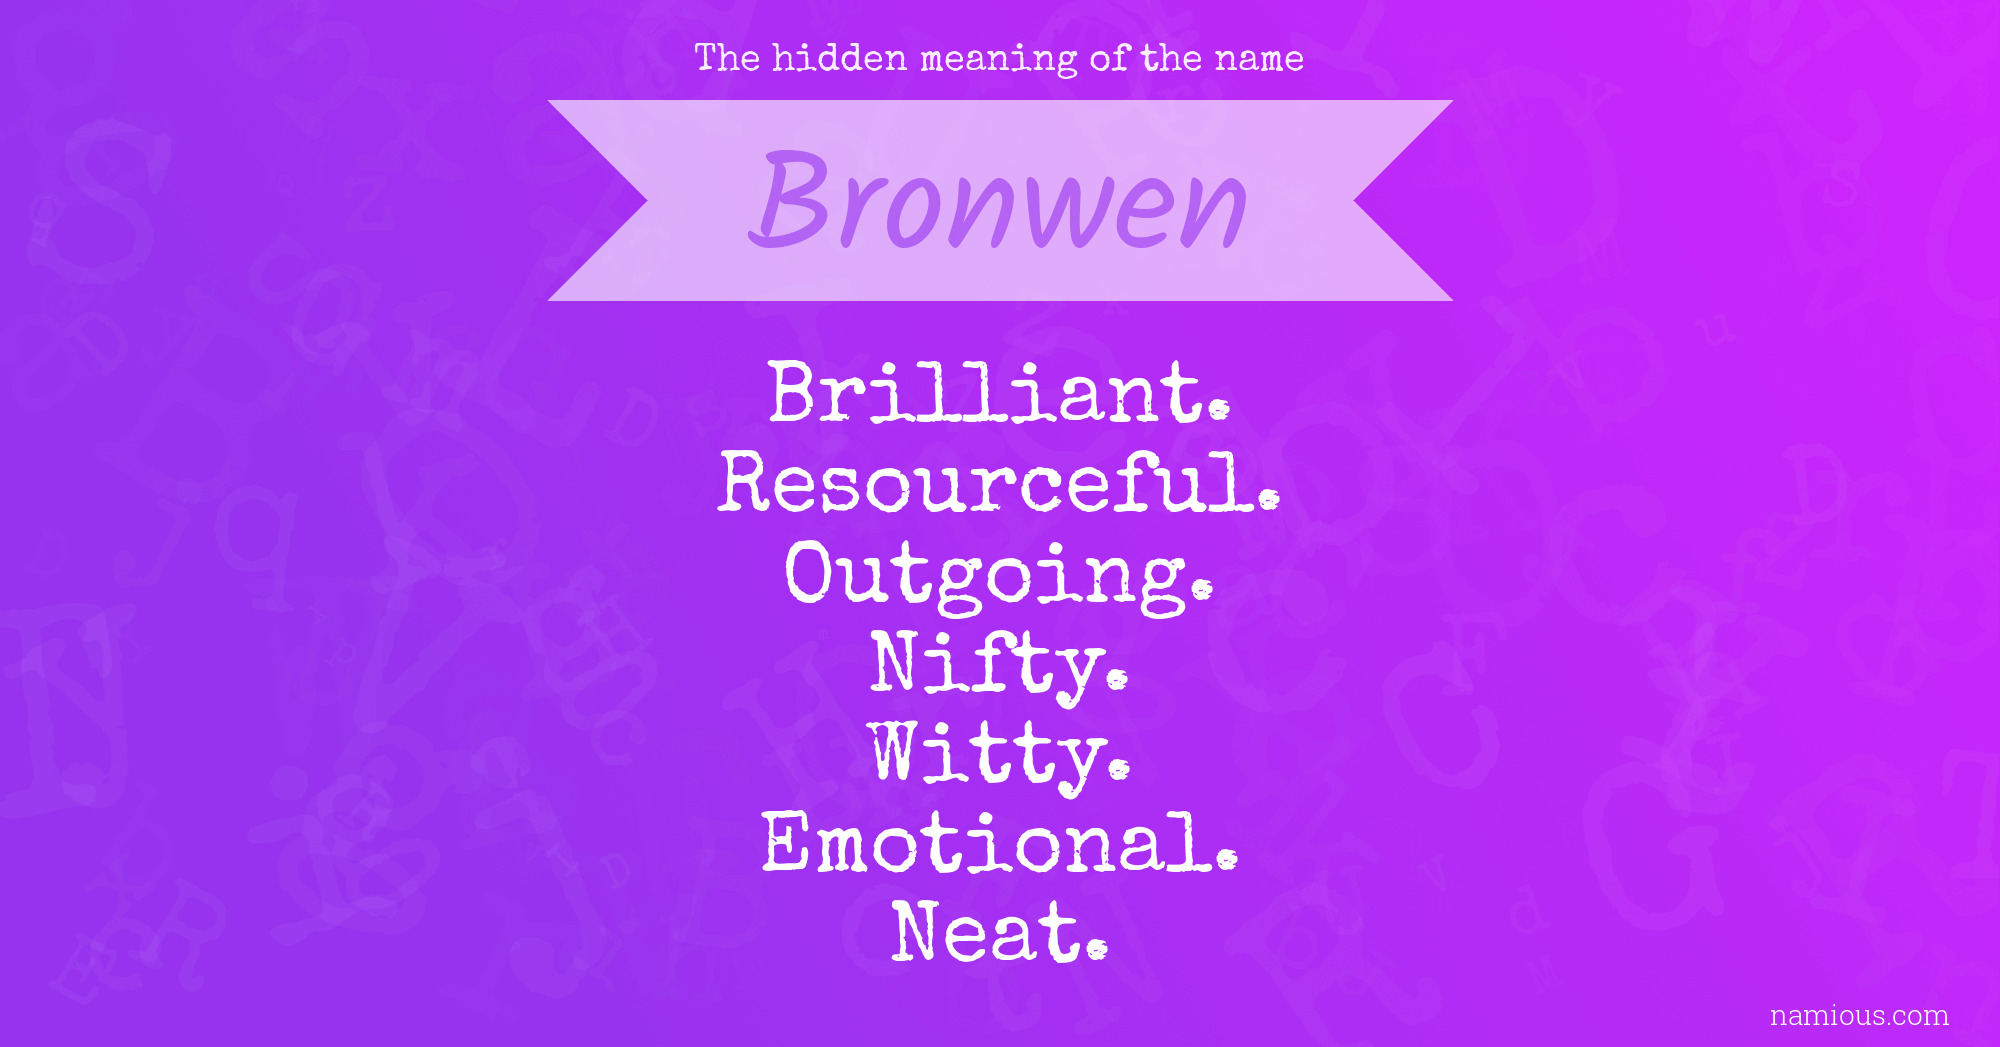 The hidden meaning of the name Bronwen